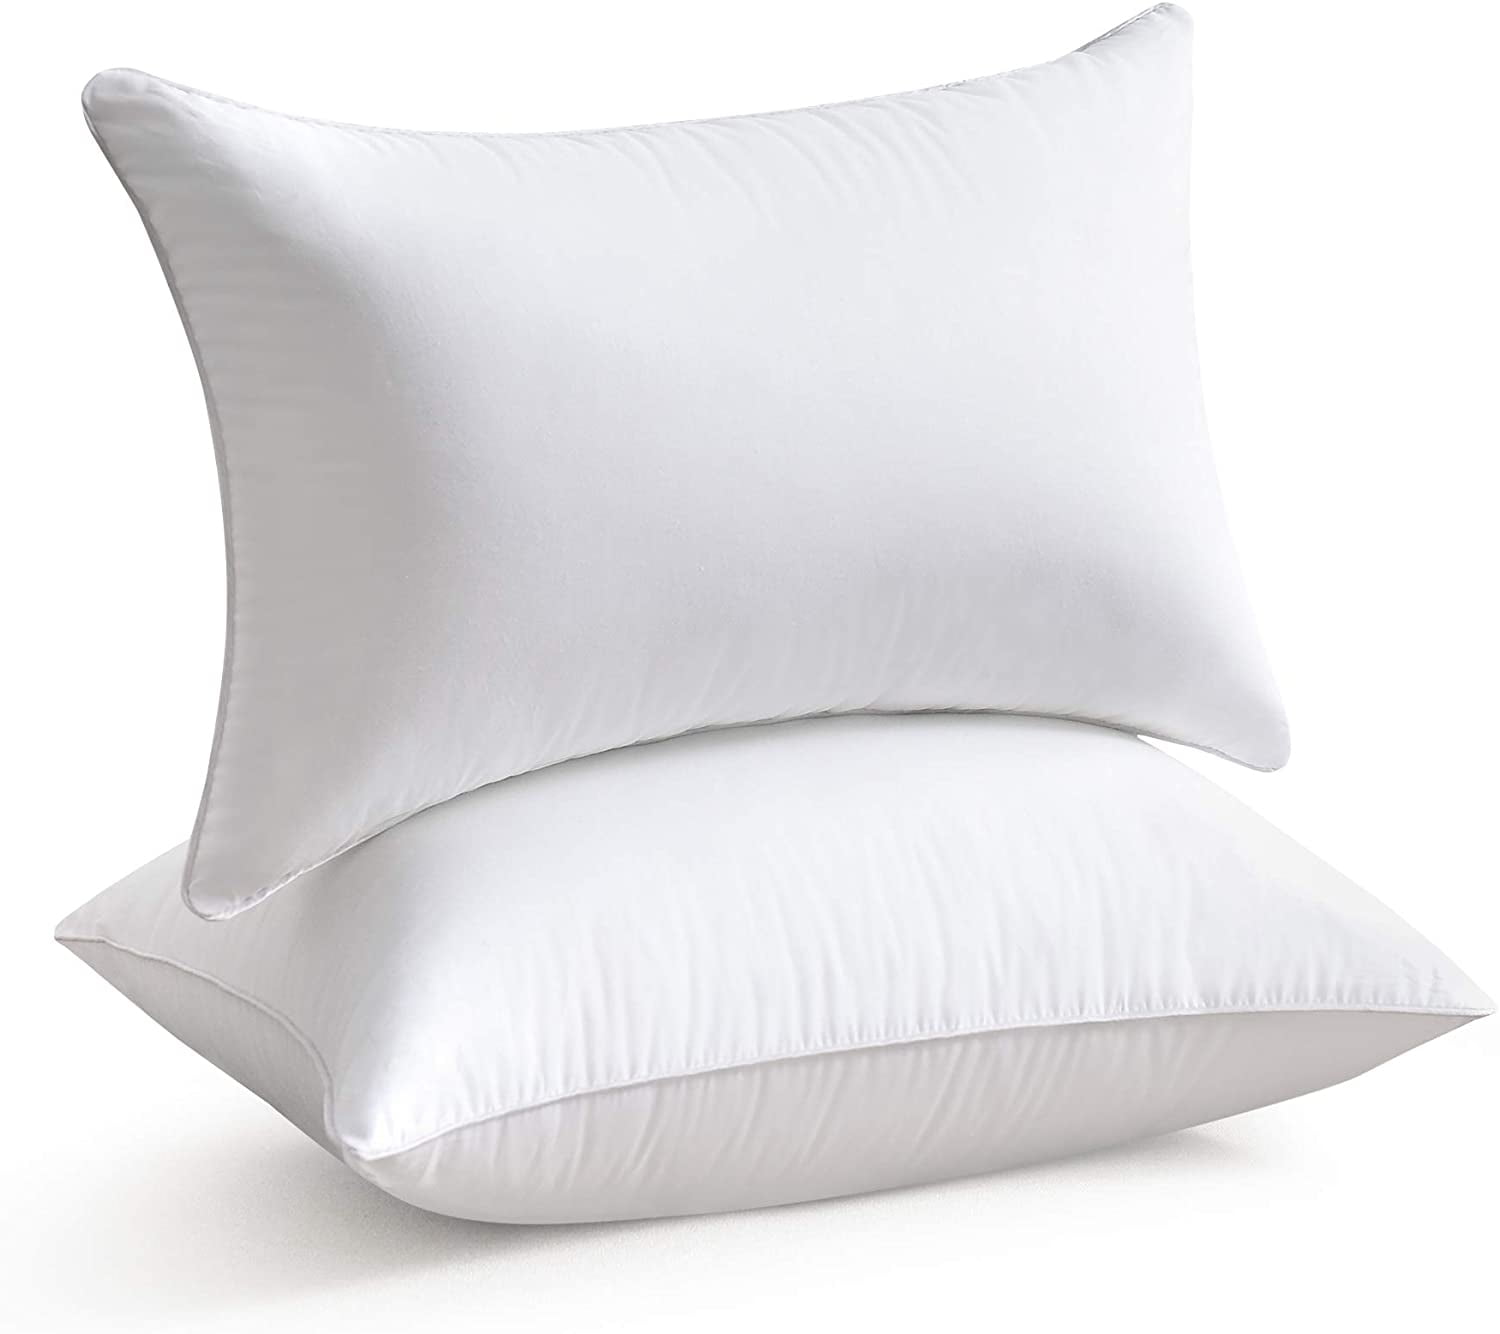 Ichrysania 18 x 18 Pillow Inserts Set of 2 with 100% Cotton Cover